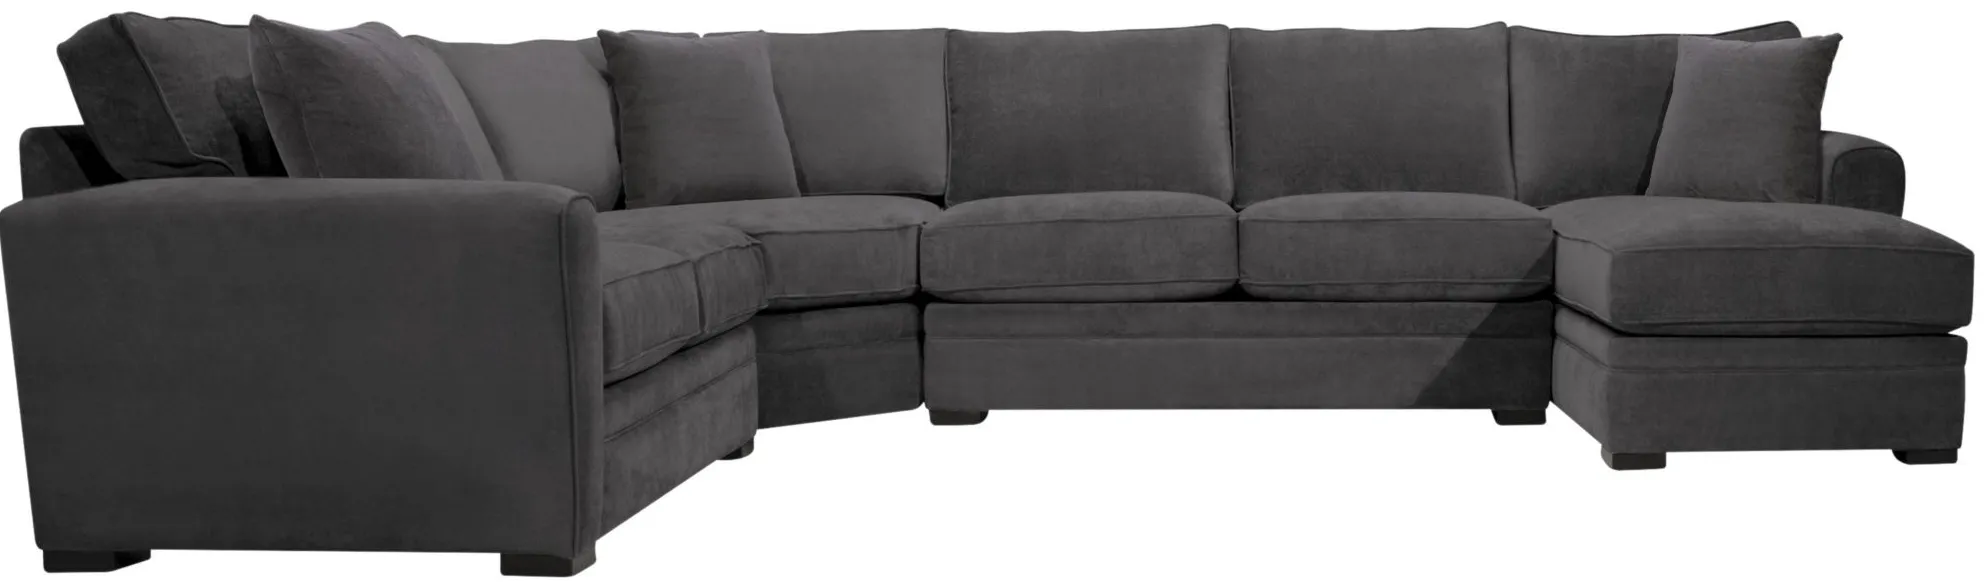 Artemis II 4-pc. Sectional Sofa in Gypsy Graphite by Jonathan Louis